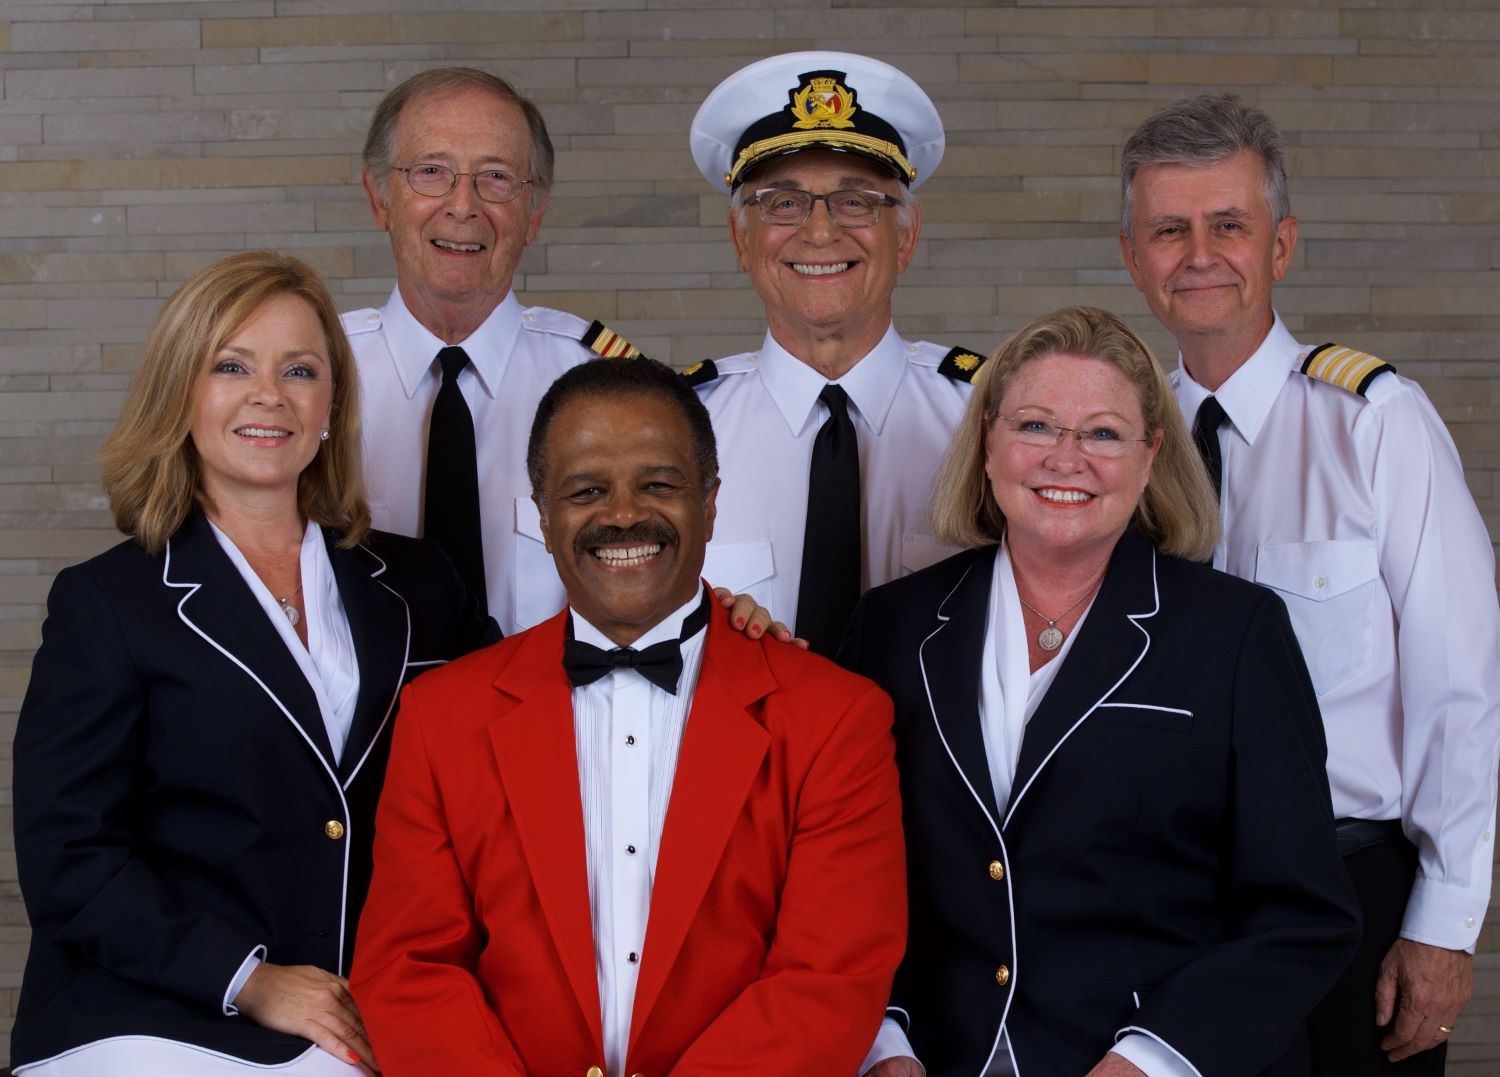 Princess Cruises Announces “The Love Boat” Themed Cruise Hosted by